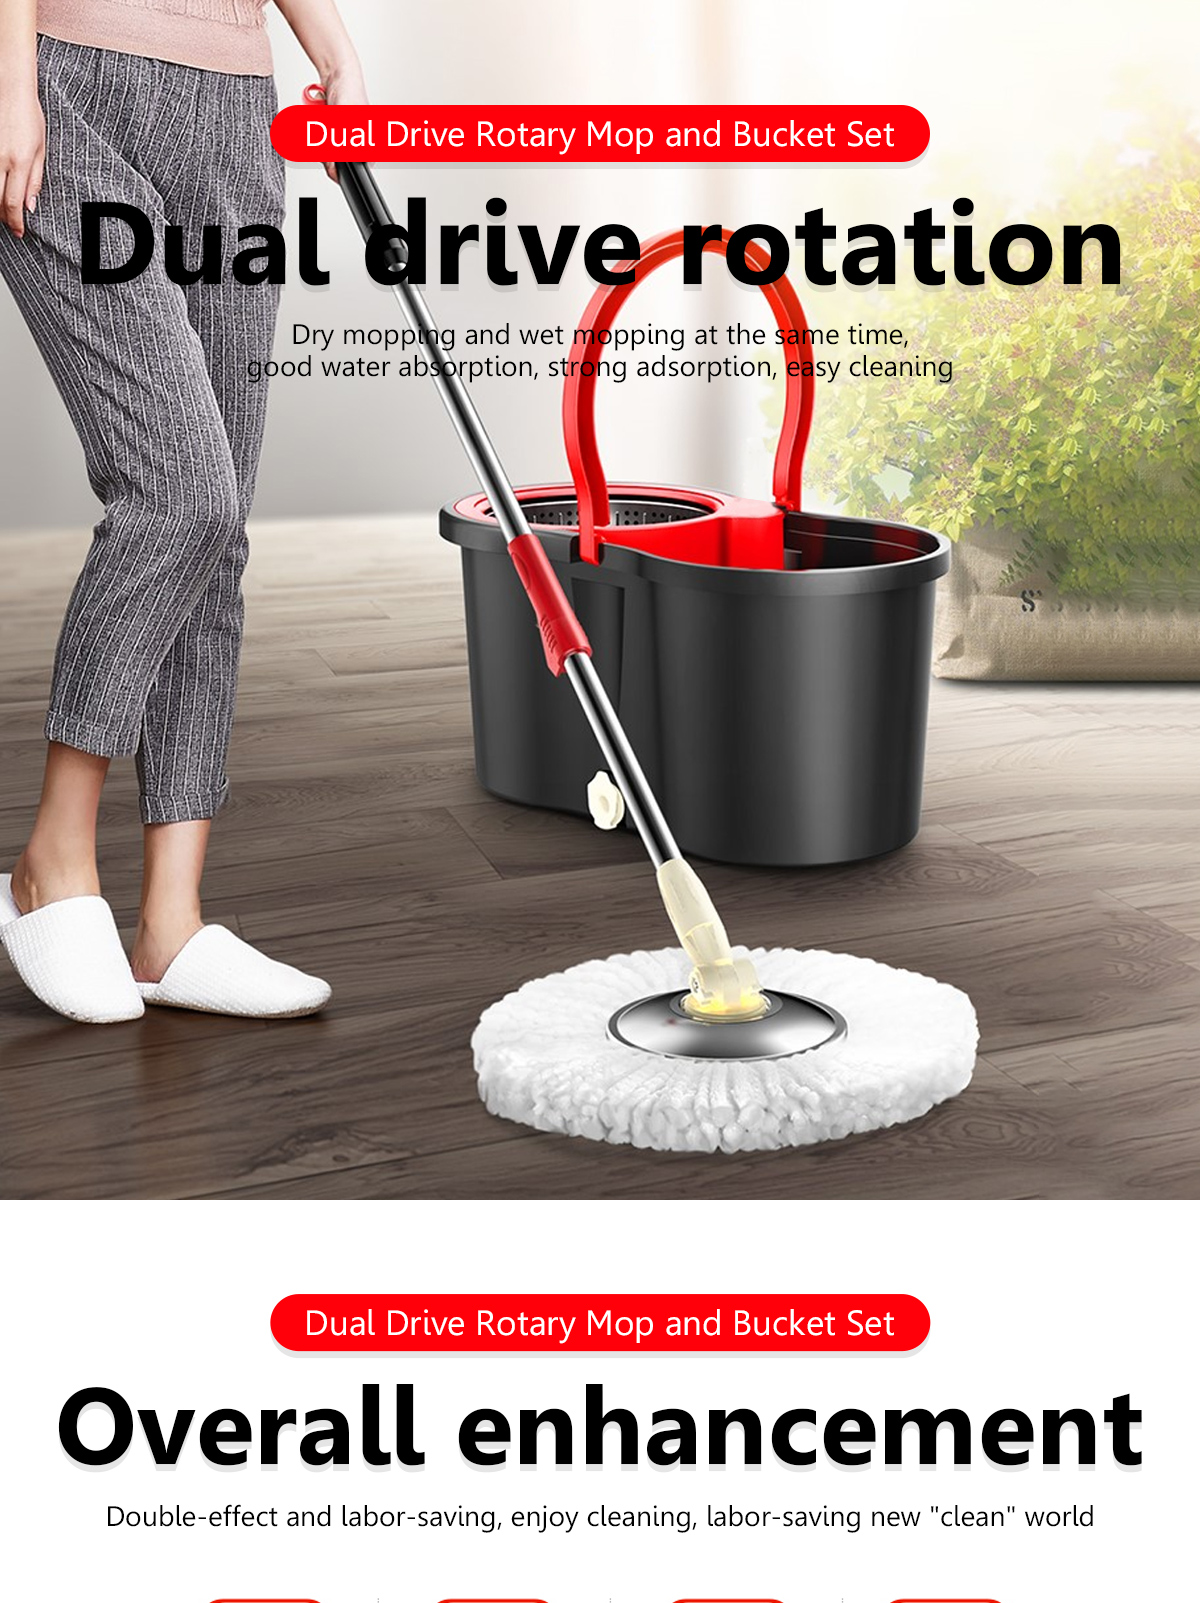 Stainless Steel Disc Dual Drive Extendable Handle Spinning Mop Microfibre Space Saving Easy Clean Mop And Buckets Sets Kitchen Bathroom Clean Tools 